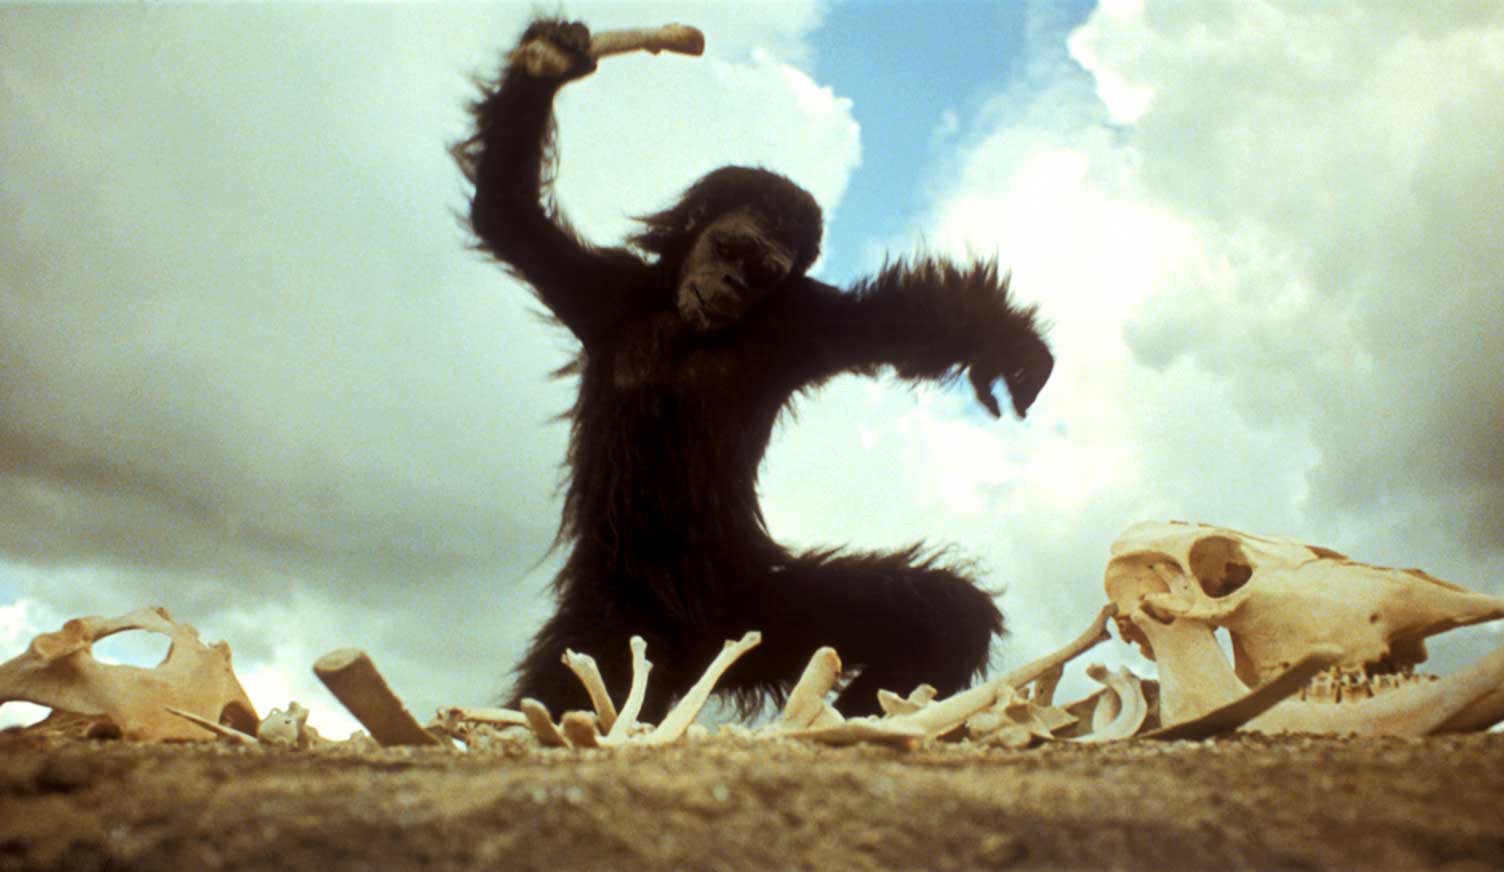 2001: A Space Odyssey Hominid